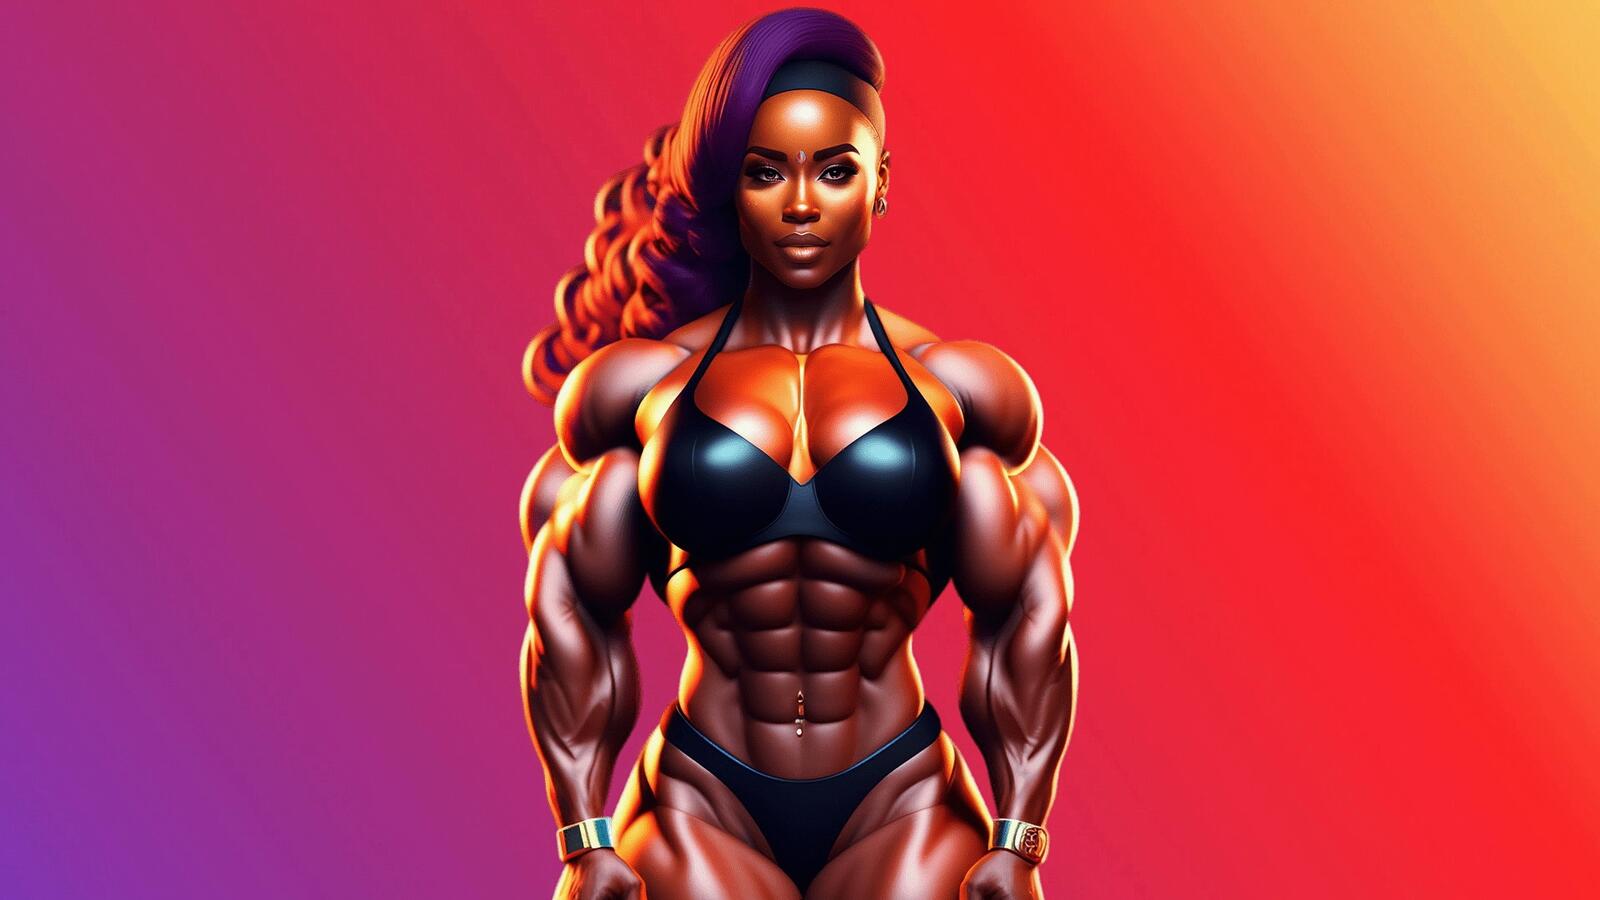 Free photo Black bodybuilder girl in a swimsuit on a colored background